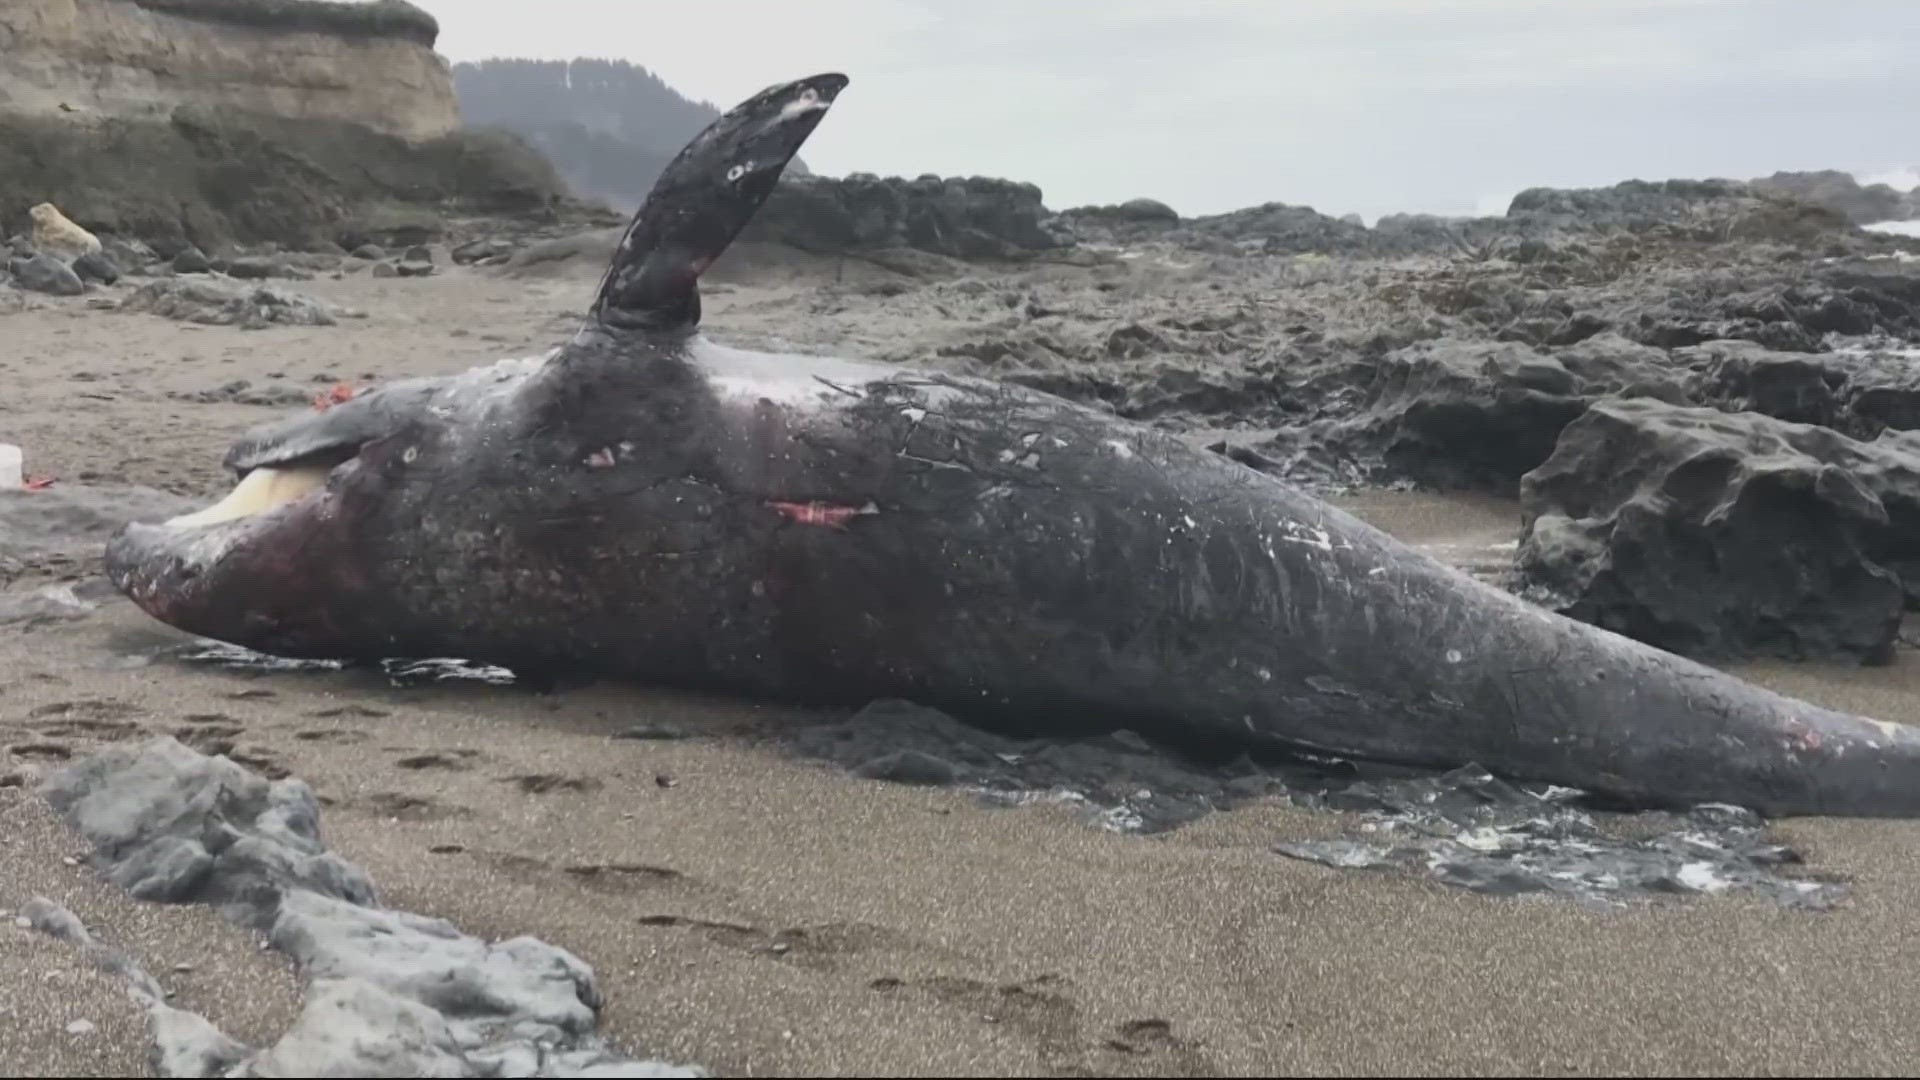 Nearly 700 whales have washed ashore in the U.S., Canada and Mexico since 2019. Oregon State University researchers believe they’ve found the cause.